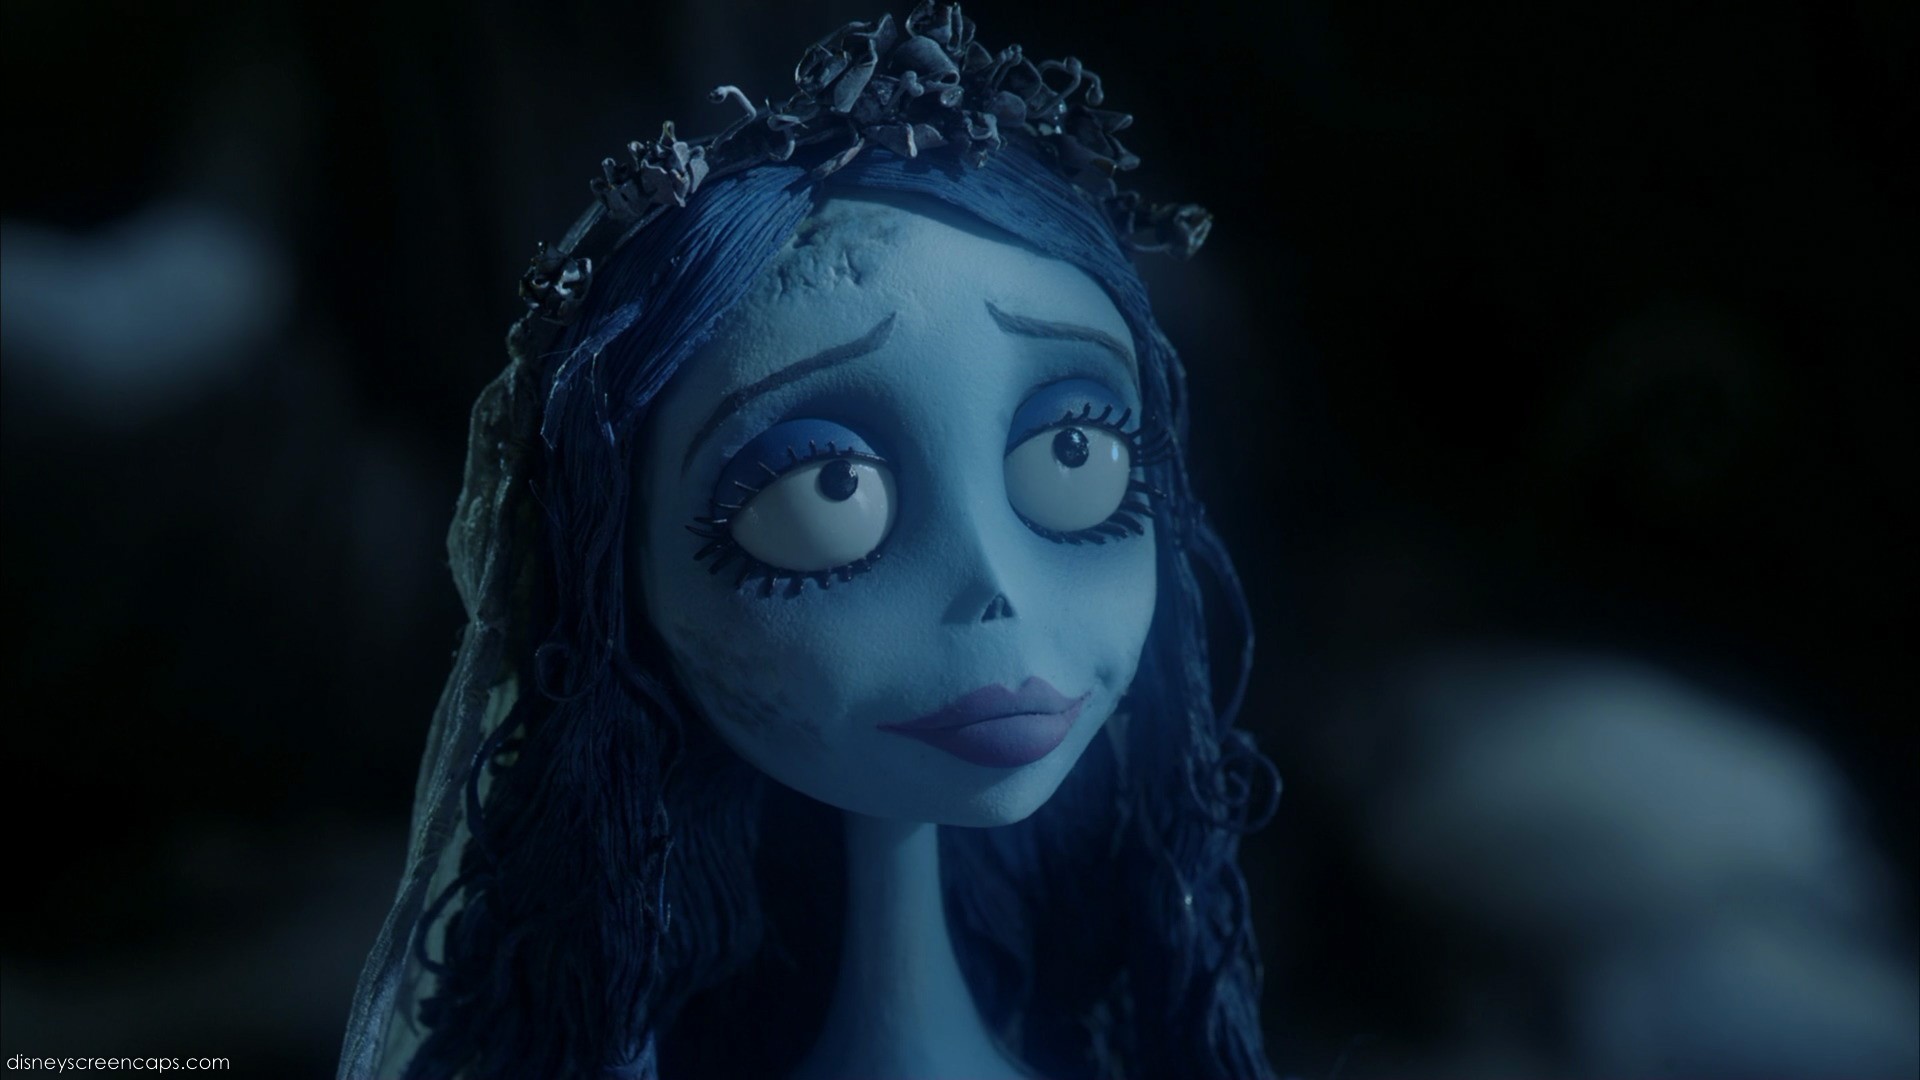 1920x1080 Childhood Animated Movie Heroines Am I the only one who thinks Emily from  The Corpse Bride is hideous and that Victoria is WAY prettier than her?